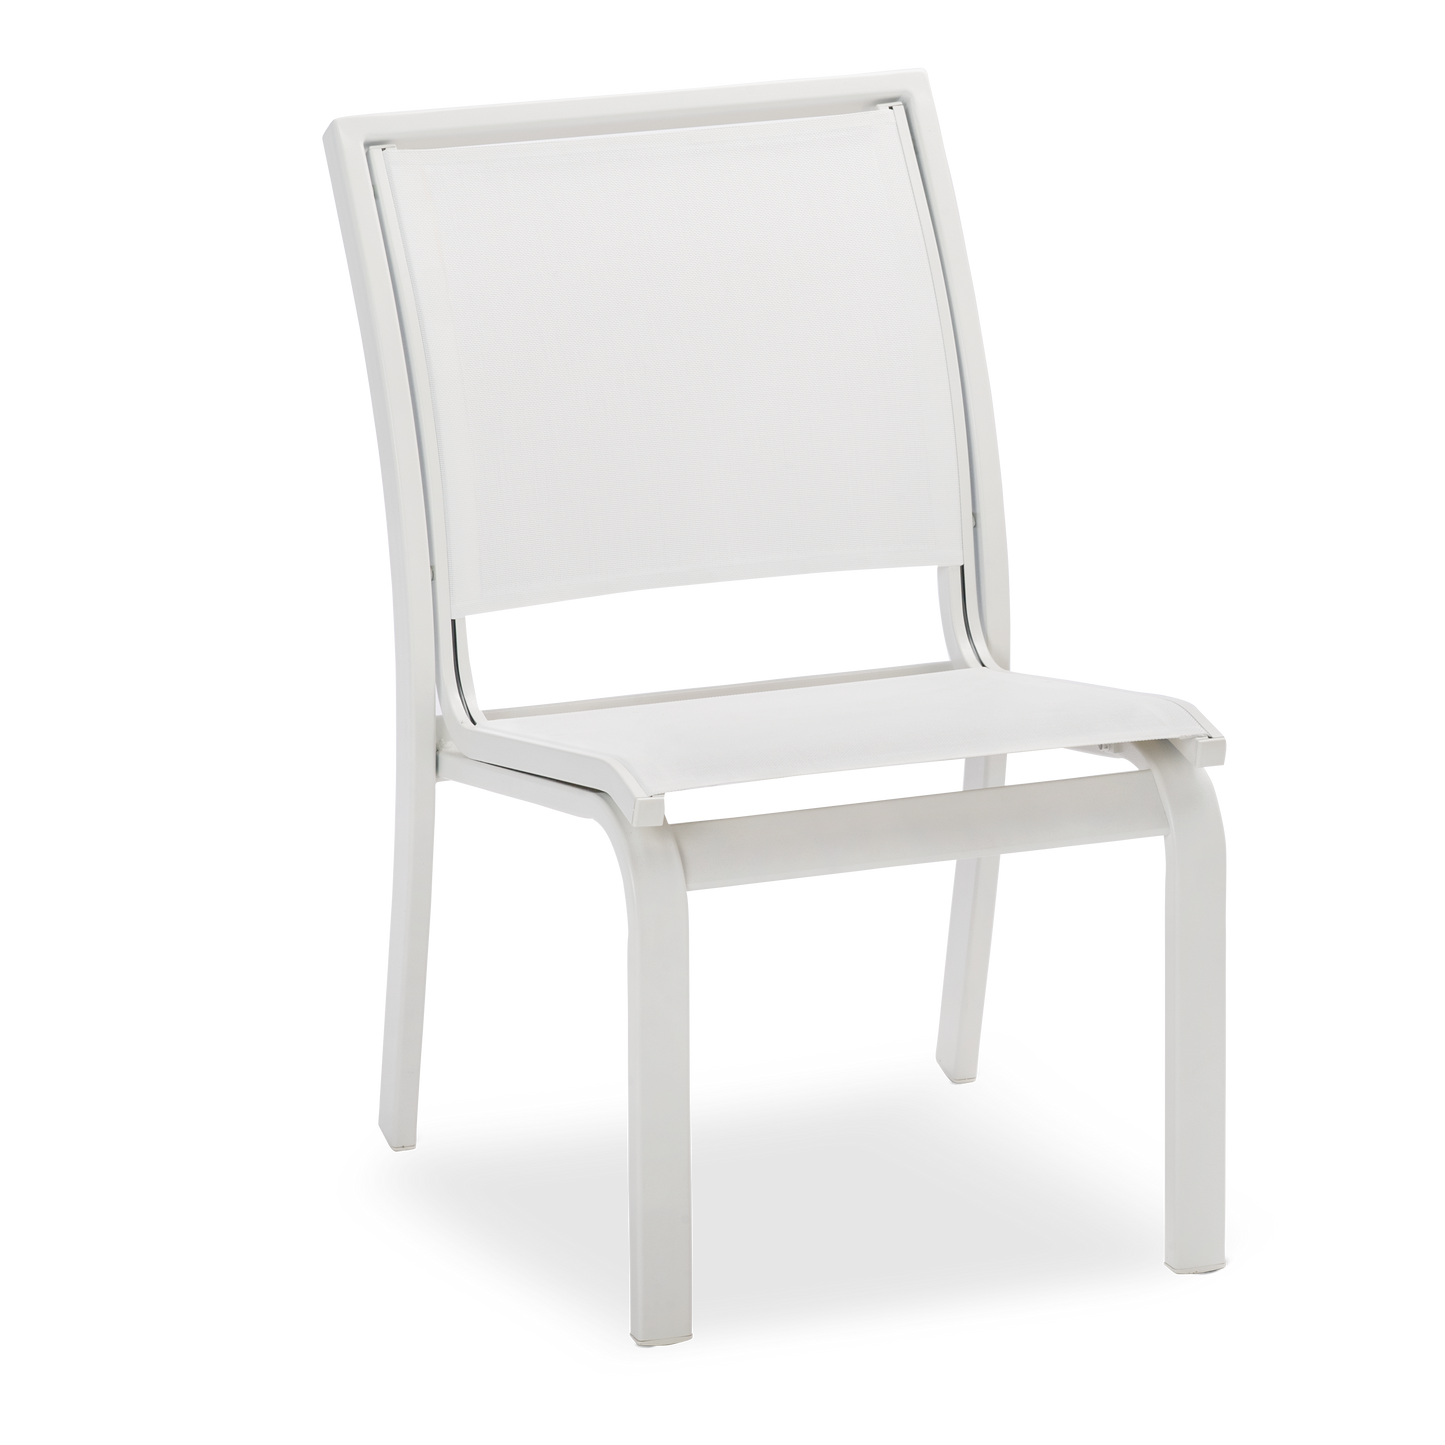 Bazza Sling Cafe Chair